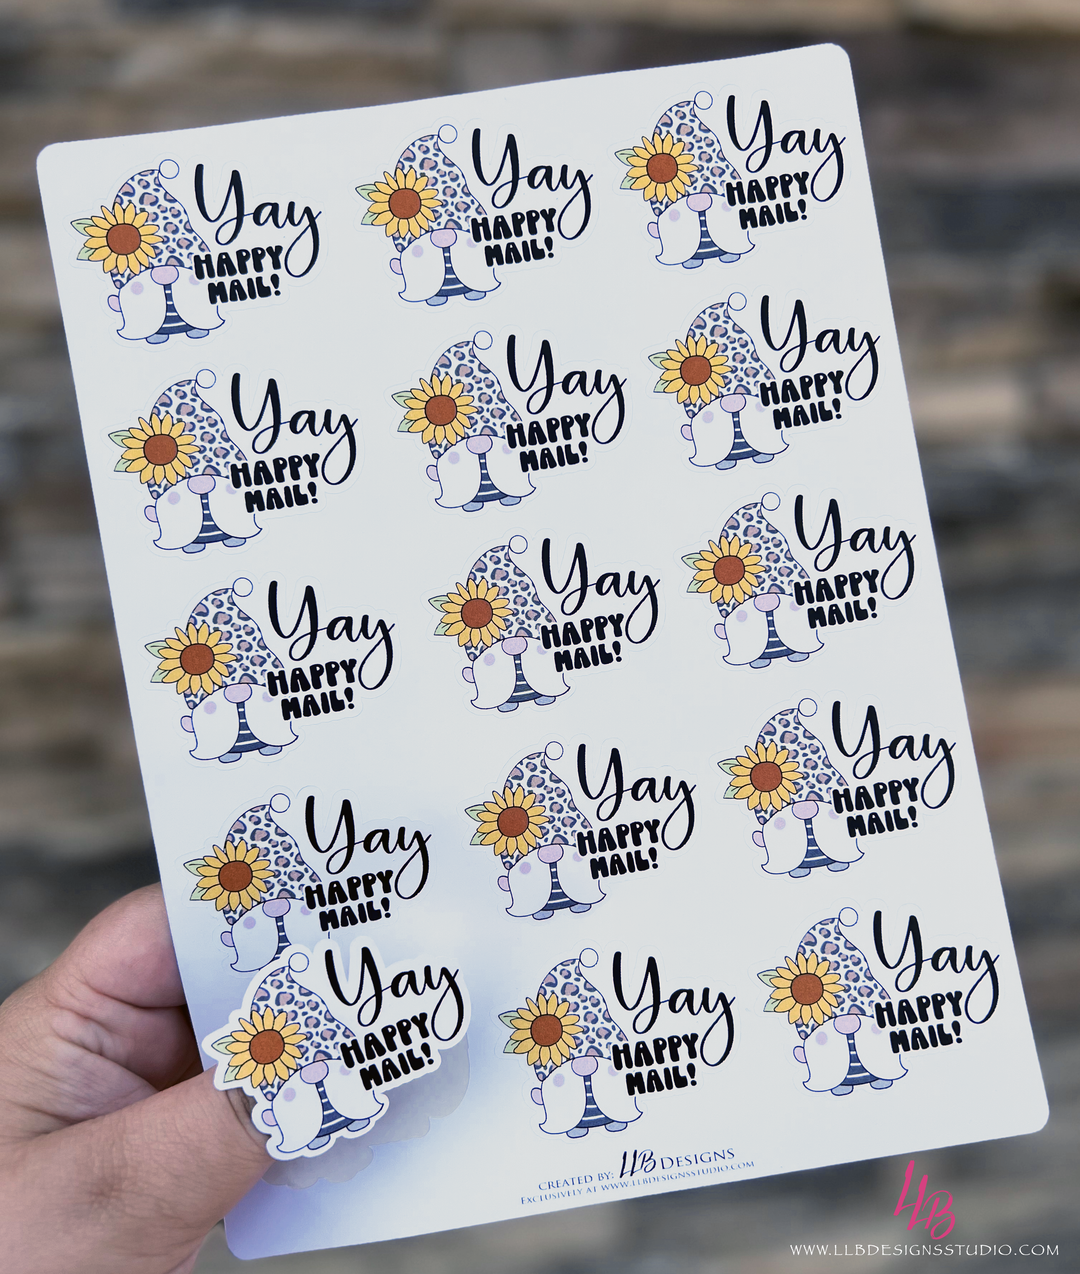 Yay! Happy Mail |  Packaging Stickers | Business Branding | Small Shop Stickers | Sticker #: S0424 | Ready To Ship